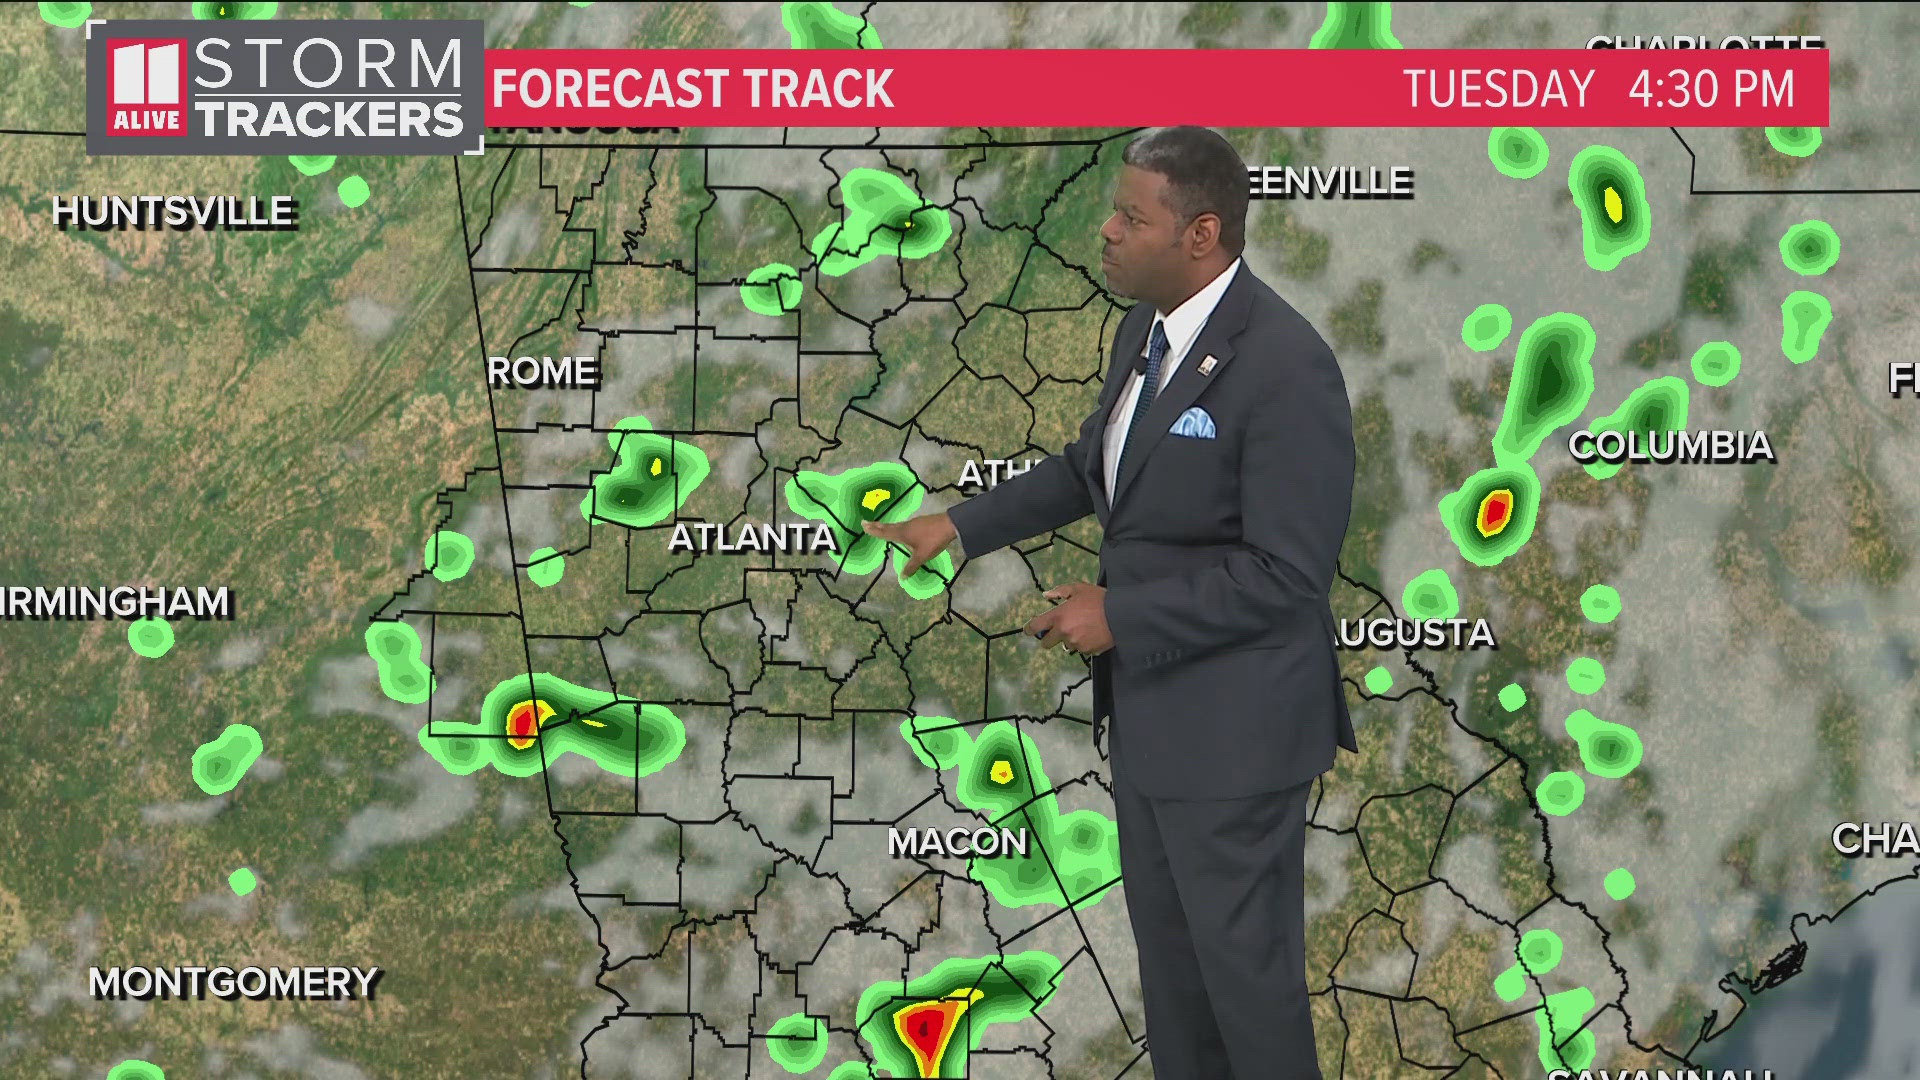 Scattered showers and a few t-storms are possible this afternoon